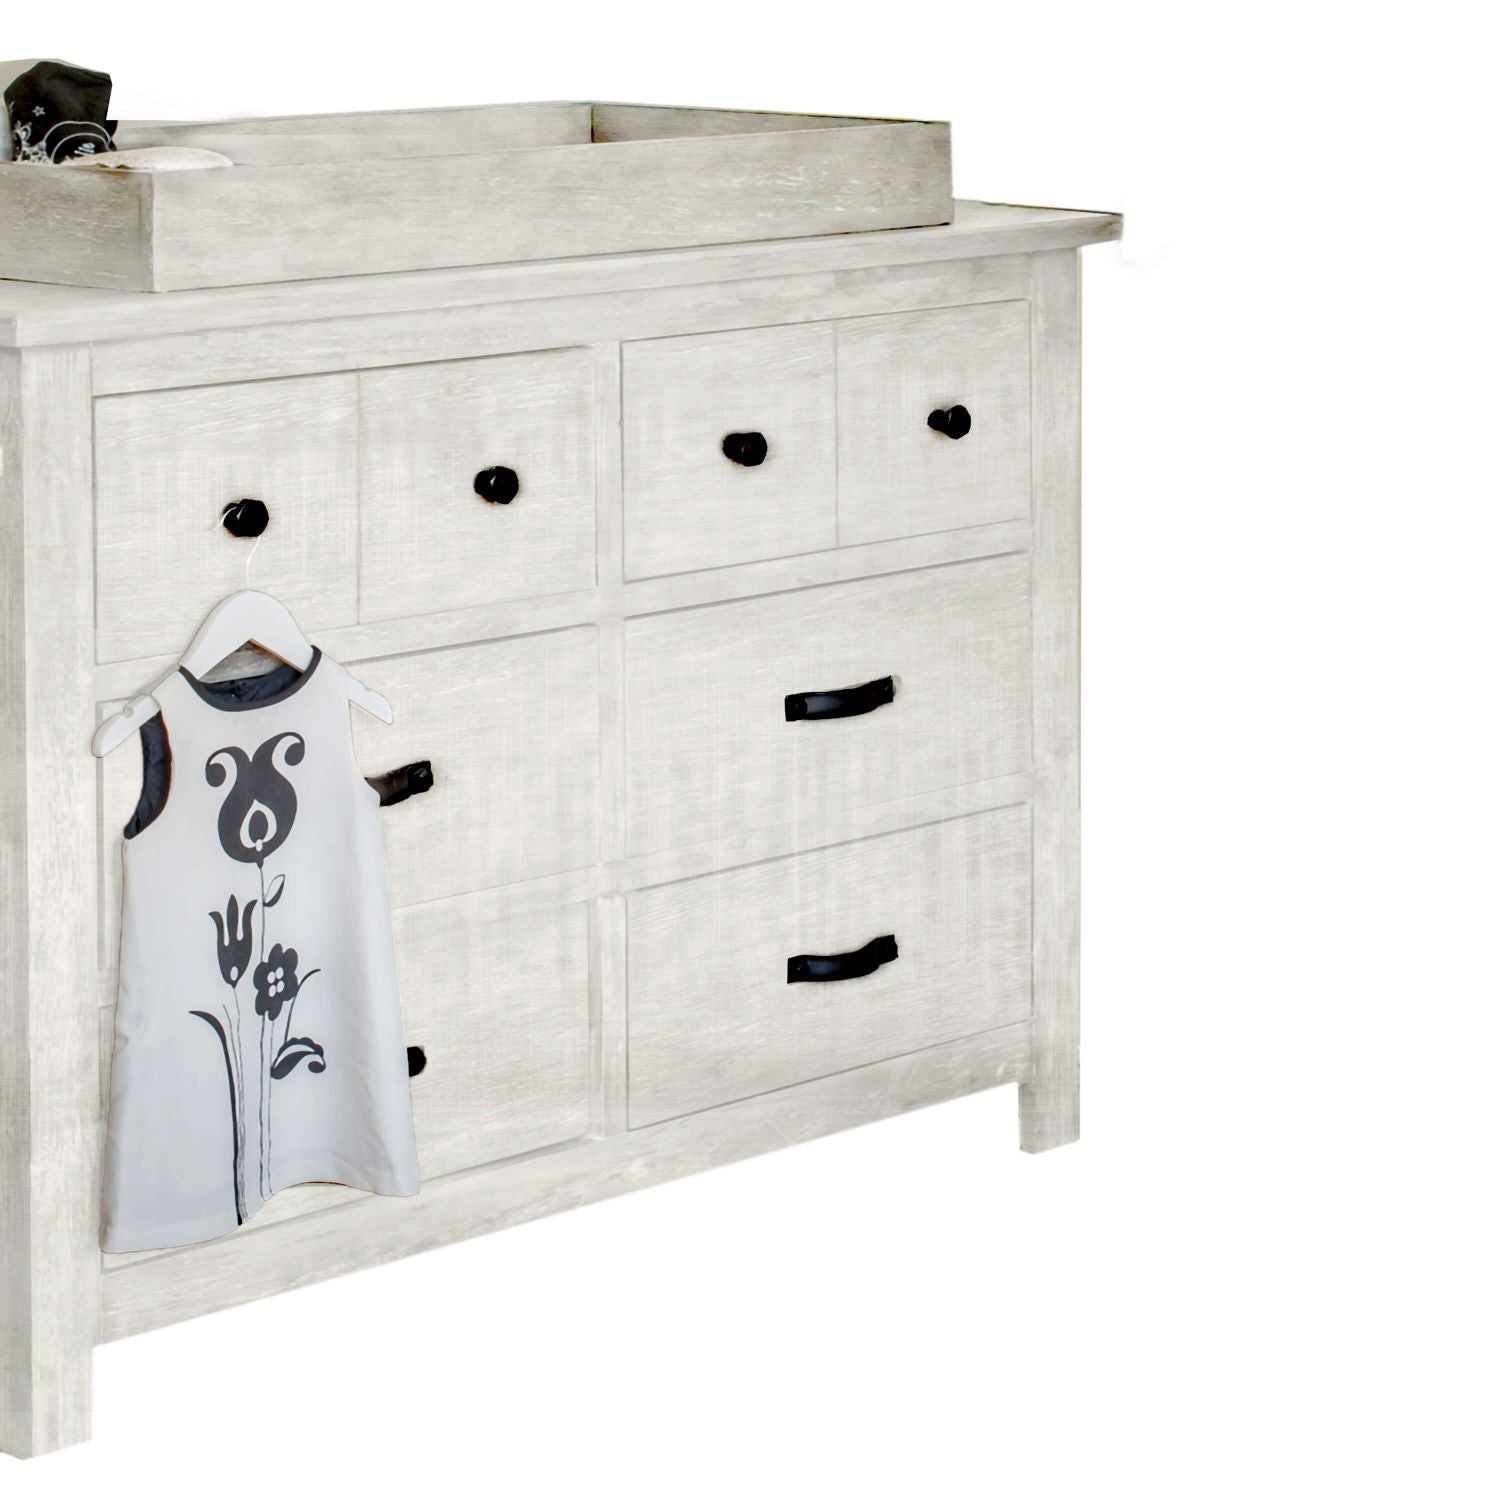 Shop the trend-setting rustic farmhouse dresser from the RELIC collection by Milk Street Baby.